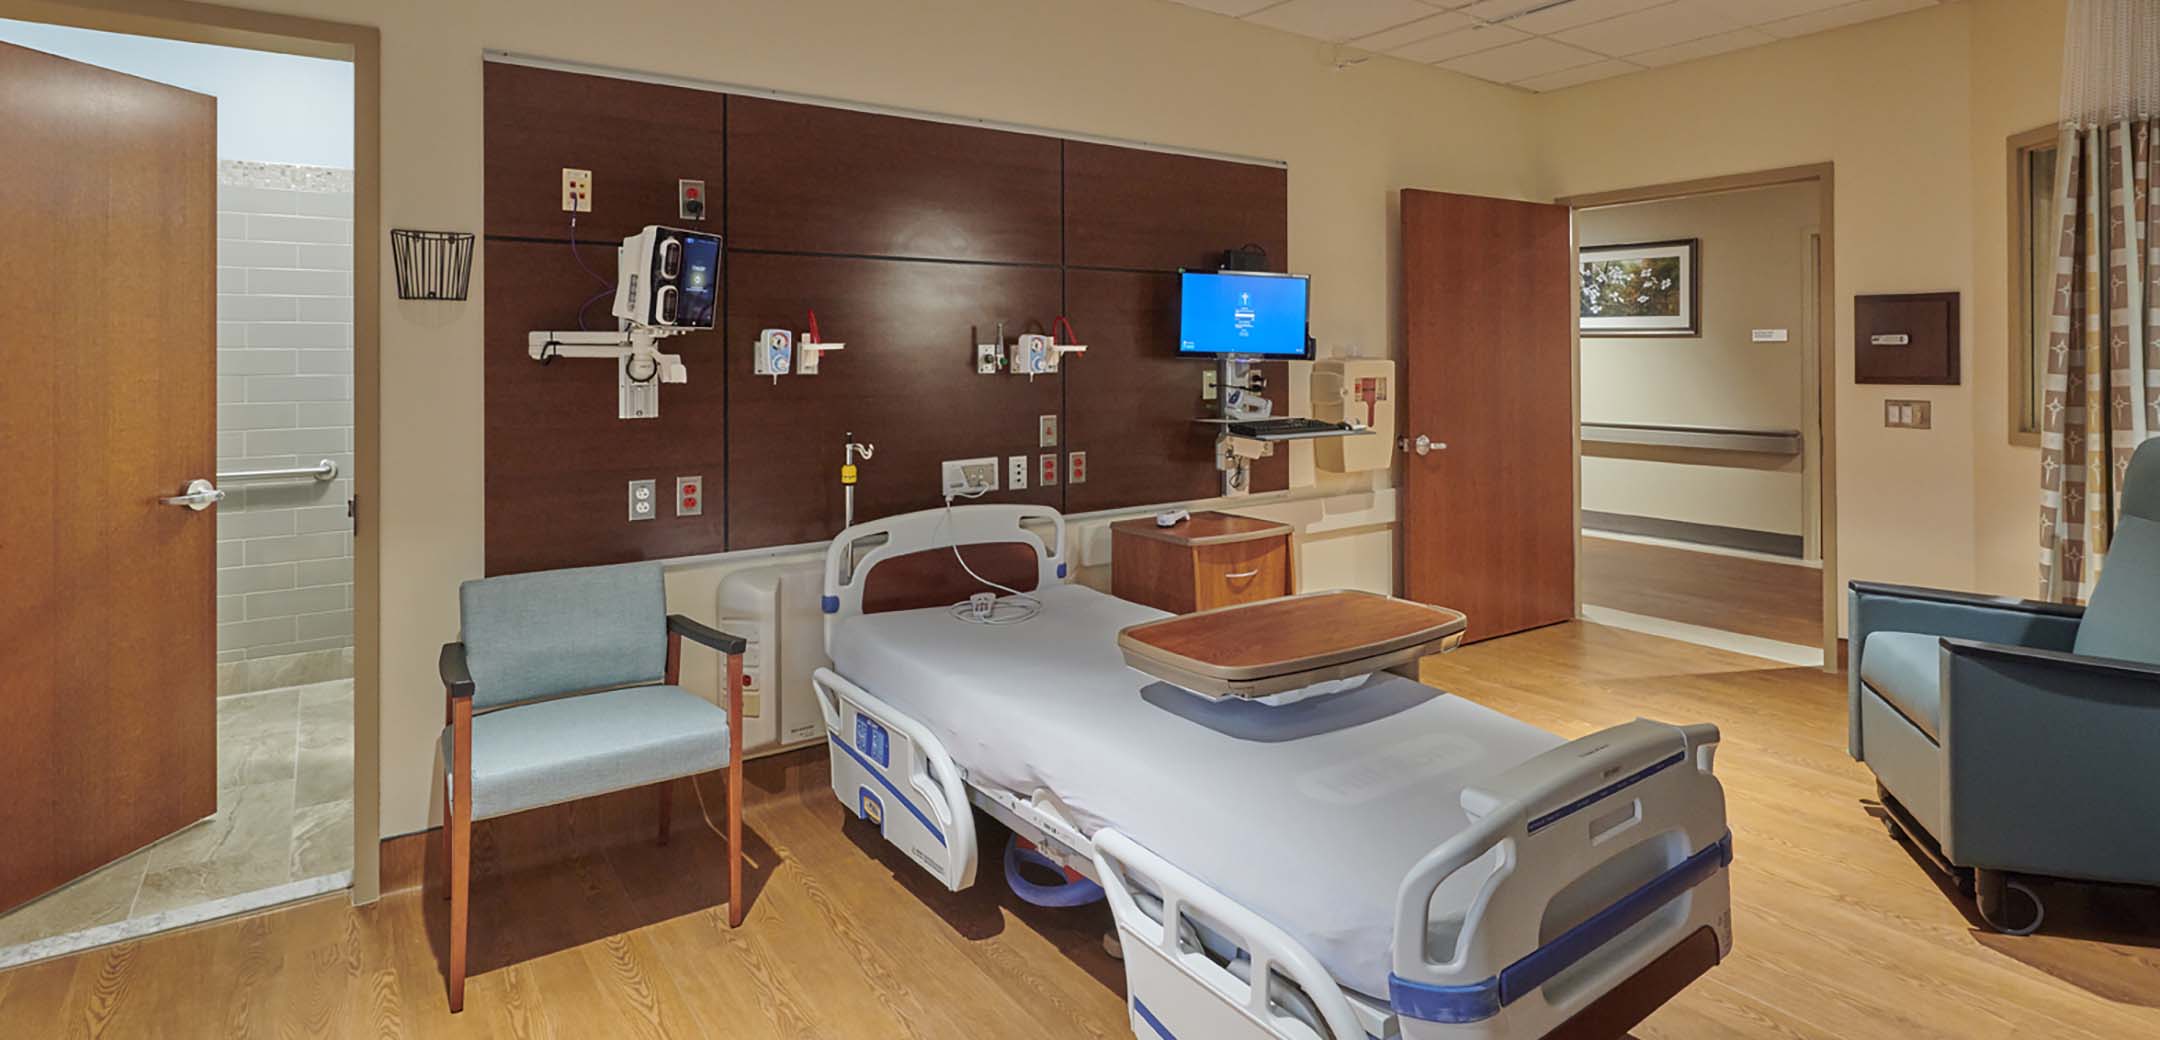 An interior view of the St Luke's Quarter building showcasing one of the patient rooms with seating chairs and patient bed with an accessible bathroom.